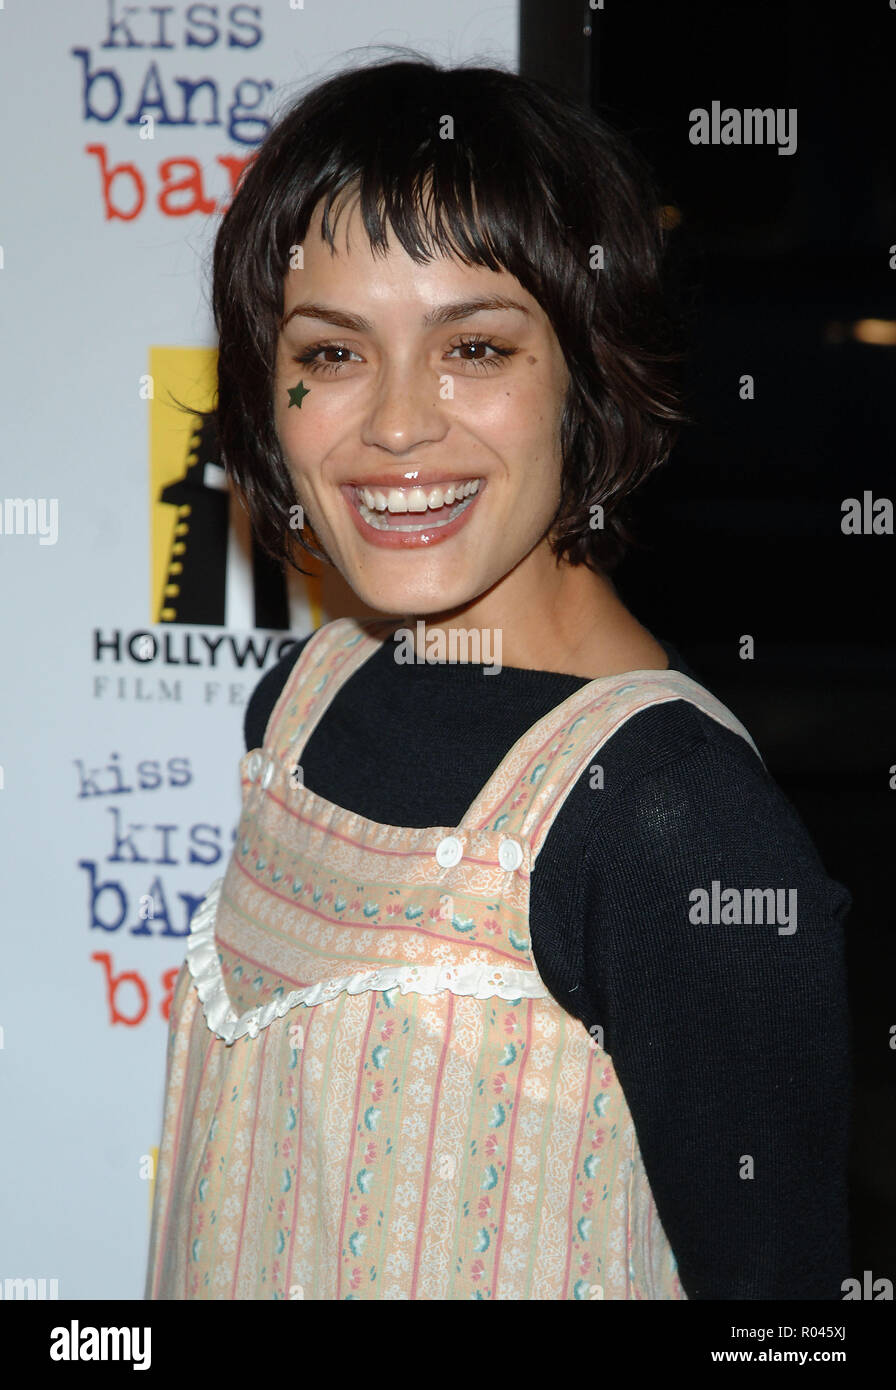 Shannin Sossamon arriving at the Kiss Kiss bang Bang Premiere at the  Chinese Theatre in Los Angeles. October 18, 2005.SossamonShannyn054 Red  Carpet Event, Vertical, USA, Film Industry, Celebrities, Photography,  Bestof, Arts Culture